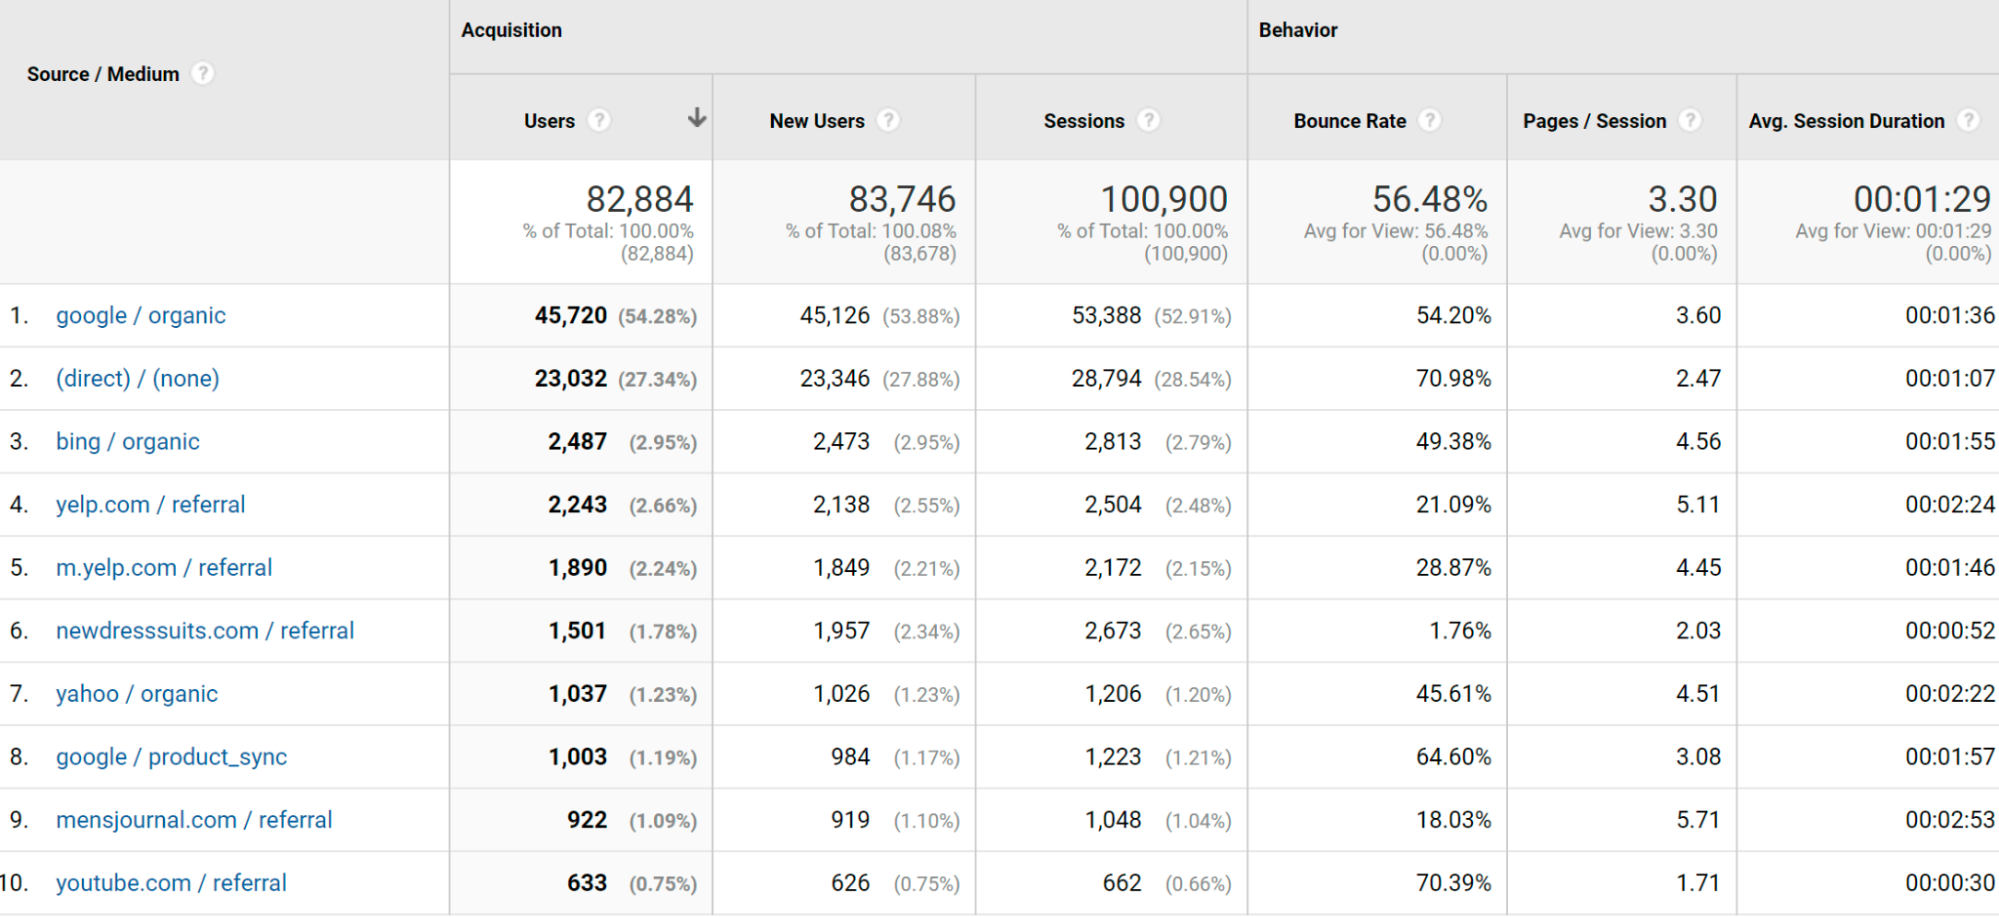 Google Analytics report showing the top acquisition channels with Bing and Yelp in third and fourth place.